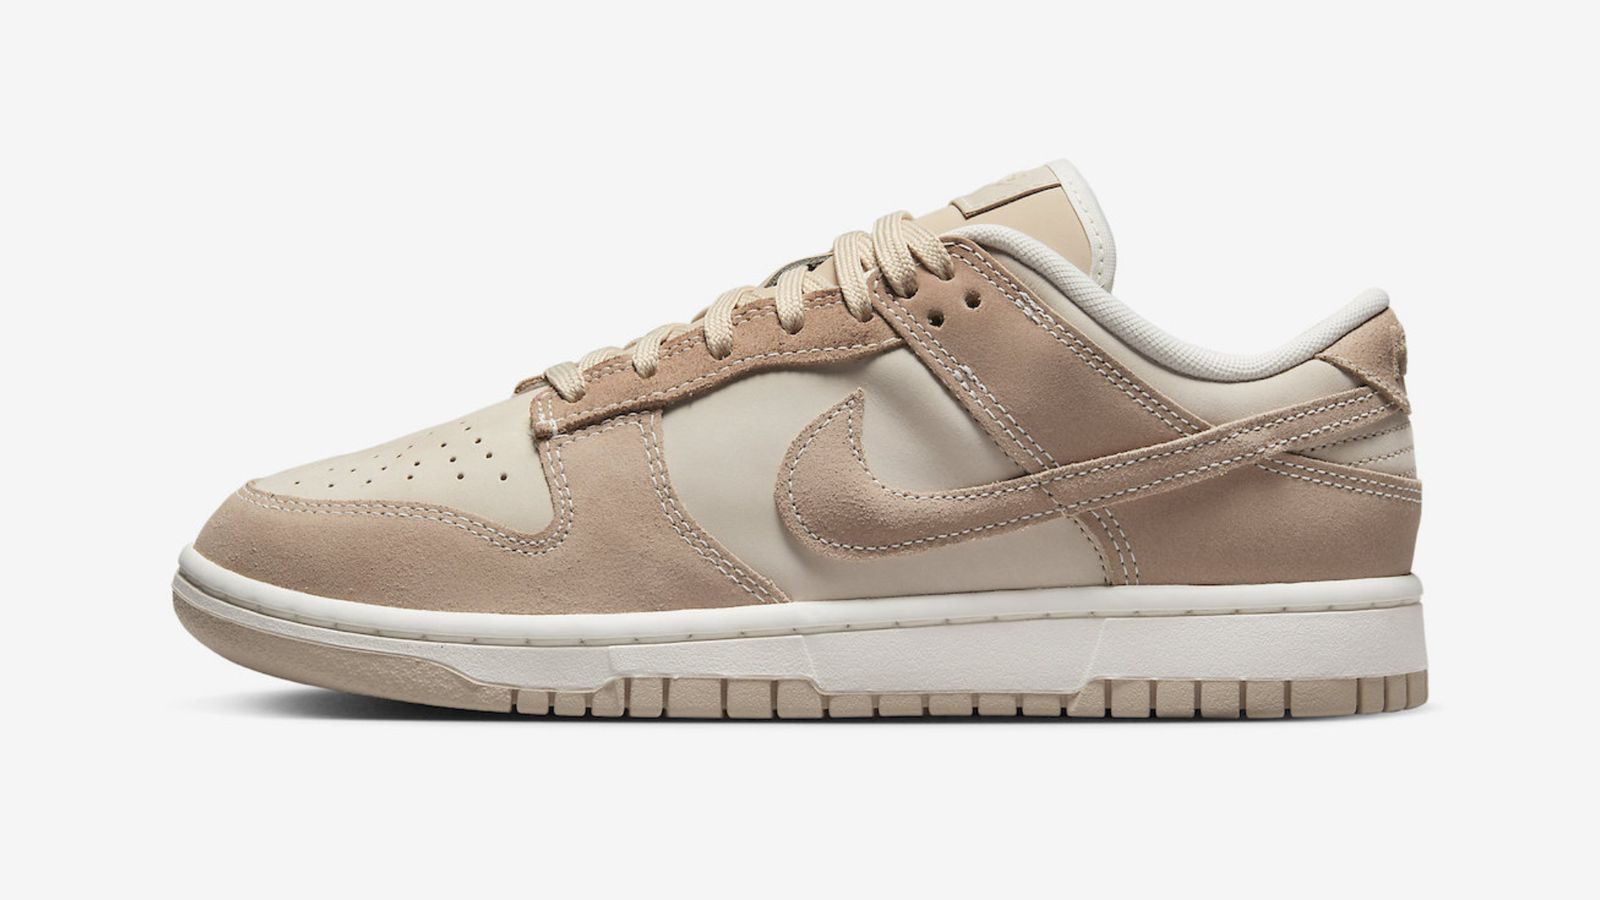 Nike Dunk Low "Sand Drift" product image of a two-tone sand-coloured low-top featuring a white midsole.